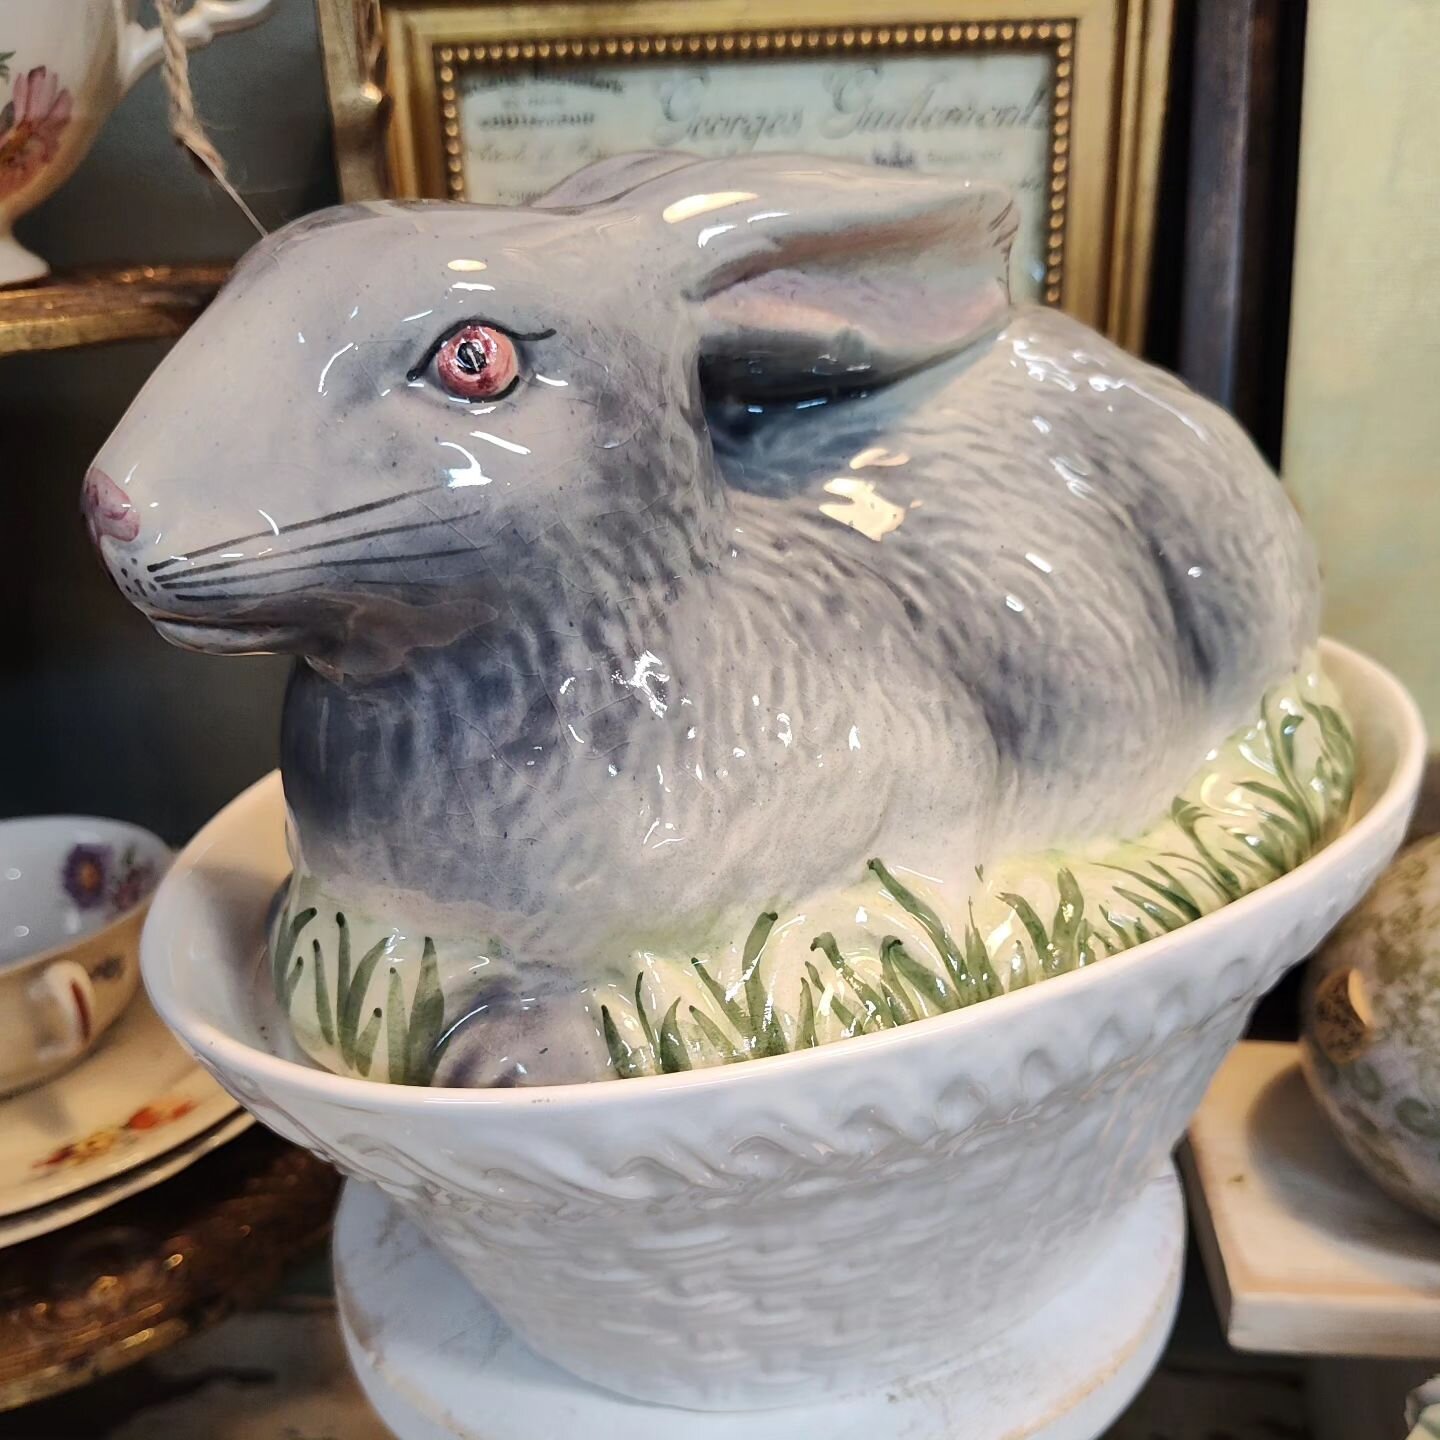 Easter Bunnies... We've got em.. Hop on in and see all our adorable bunnies!
Don't let those spring showers keep you away, lots of fun new things to see at The Garage on 25.
#springdecor 
#springinasheville 
#easterinasheville 
#easterdecor
#shopflet